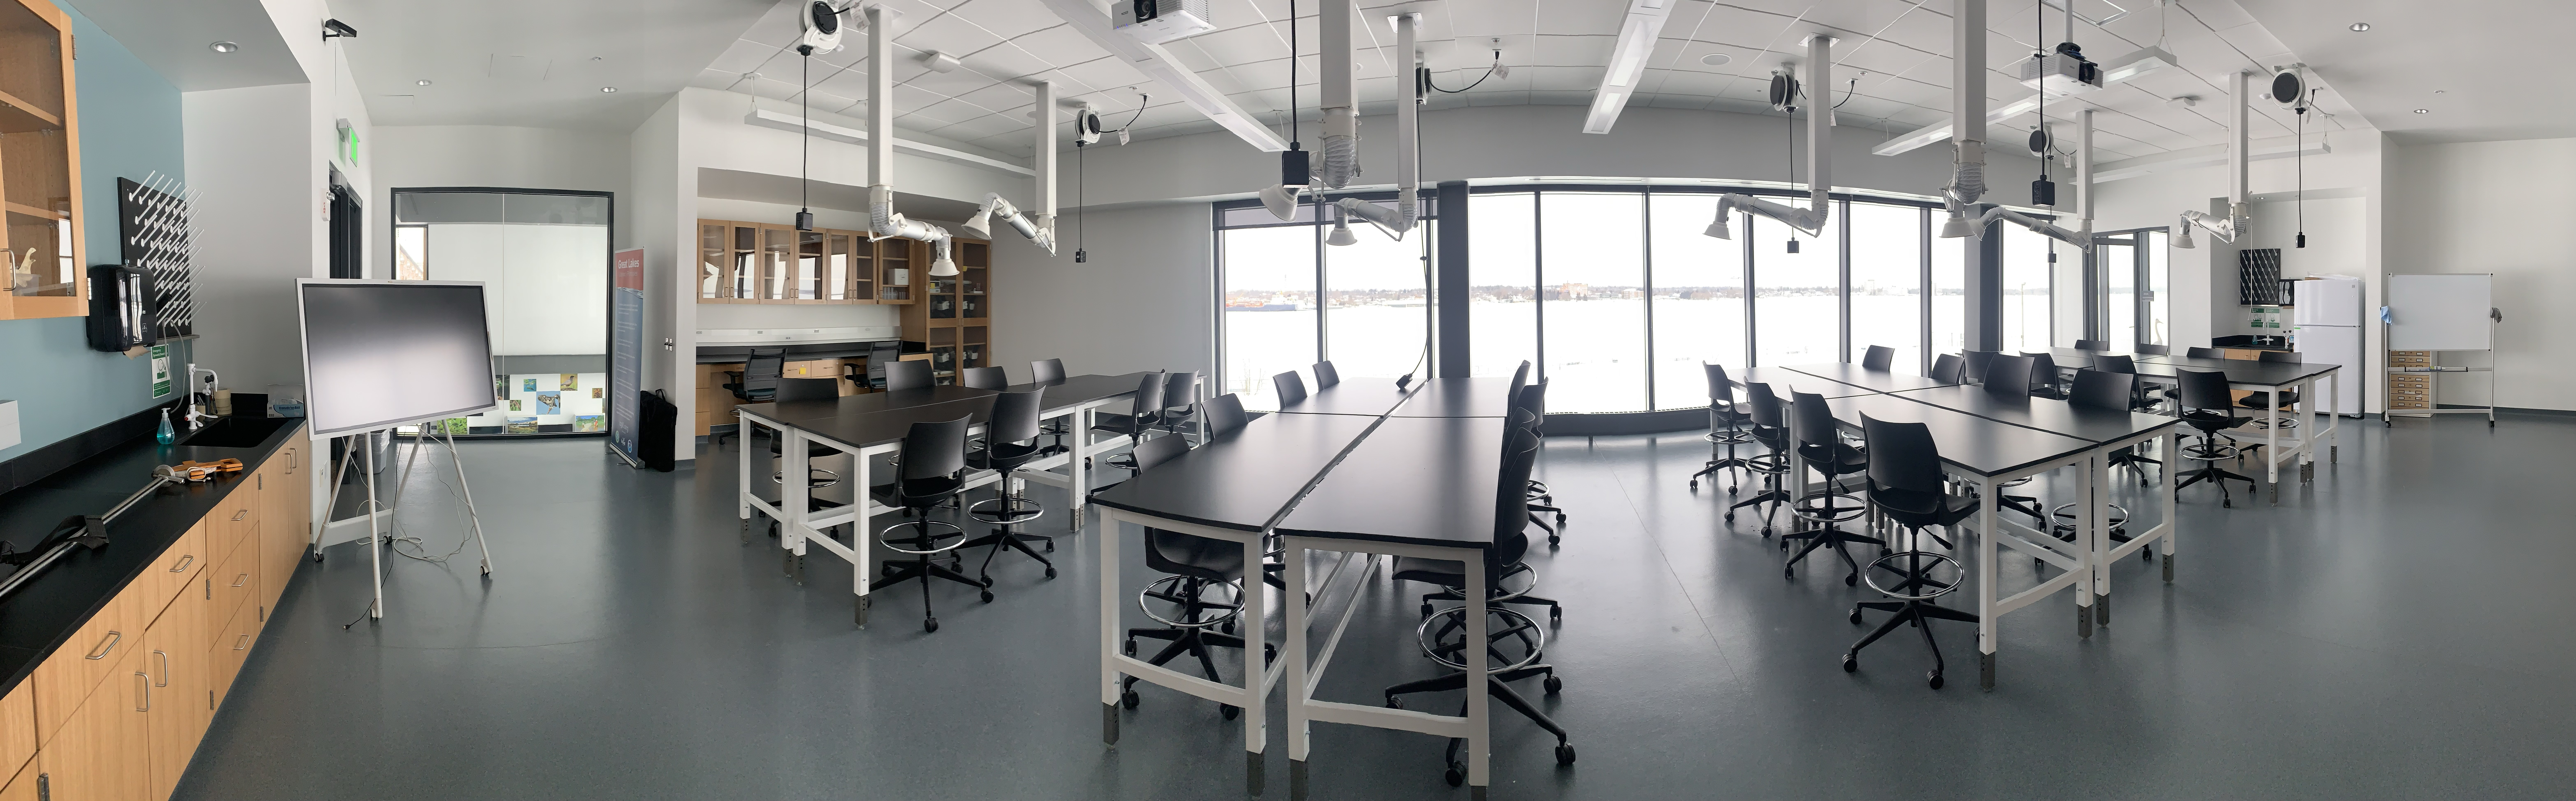 Lab with black desks and chairs